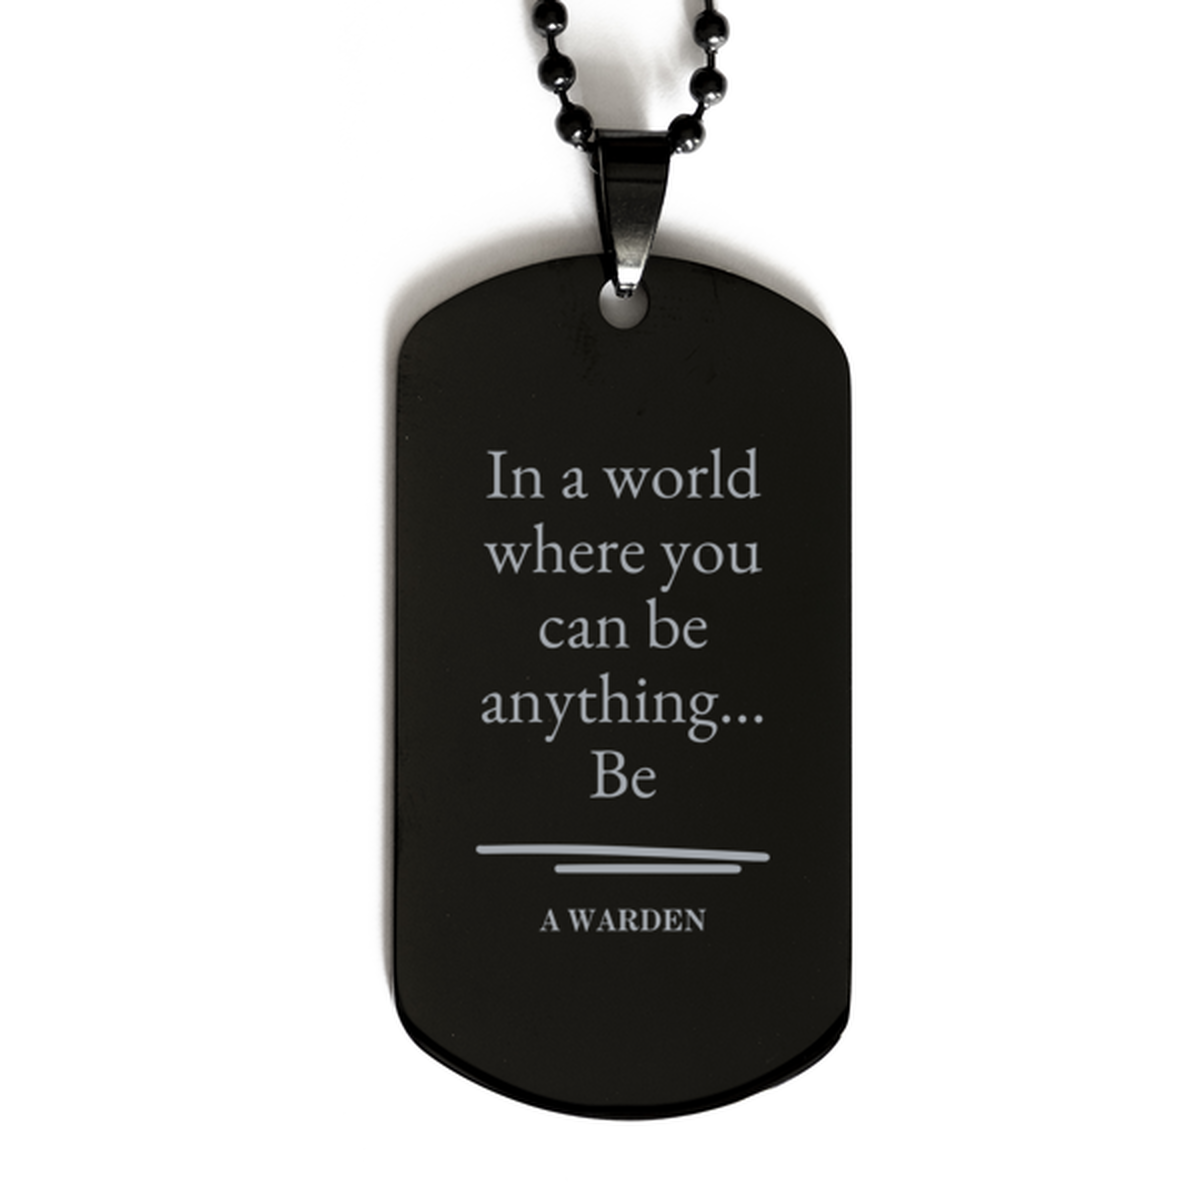 Gifts for Warden, In a world where you can be anything, Appreciation Birthday Black Dog Tag for Men, Women, Friends, Coworkers